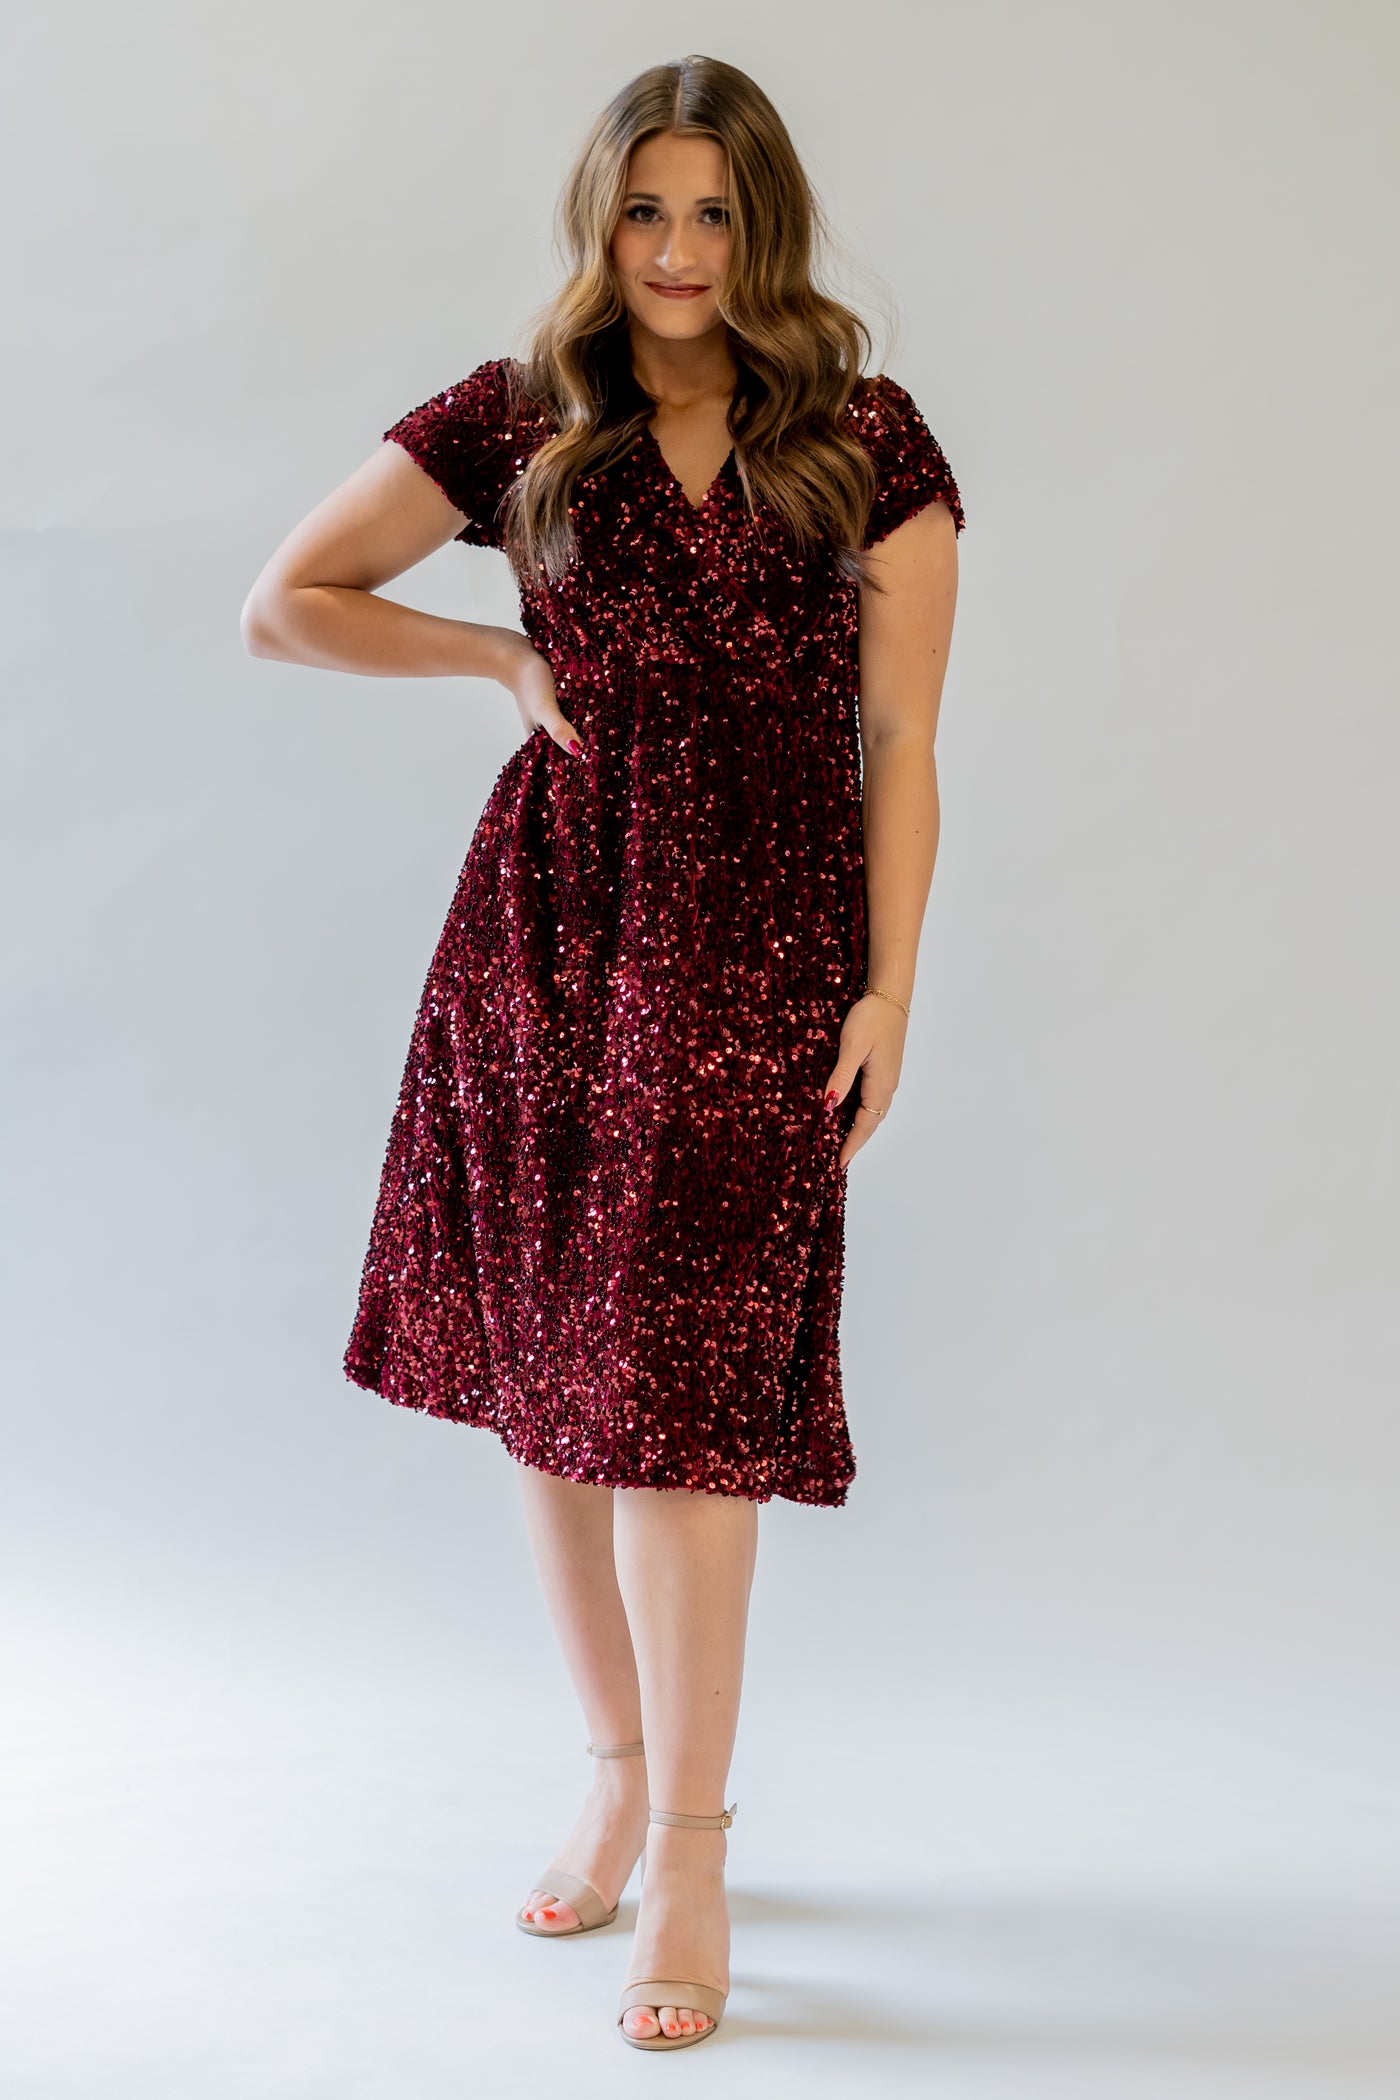 Sparkly modest bridesmaid dress with v-neckline. It is burgundy and has sequins covering the dress. It has a higher waistline.